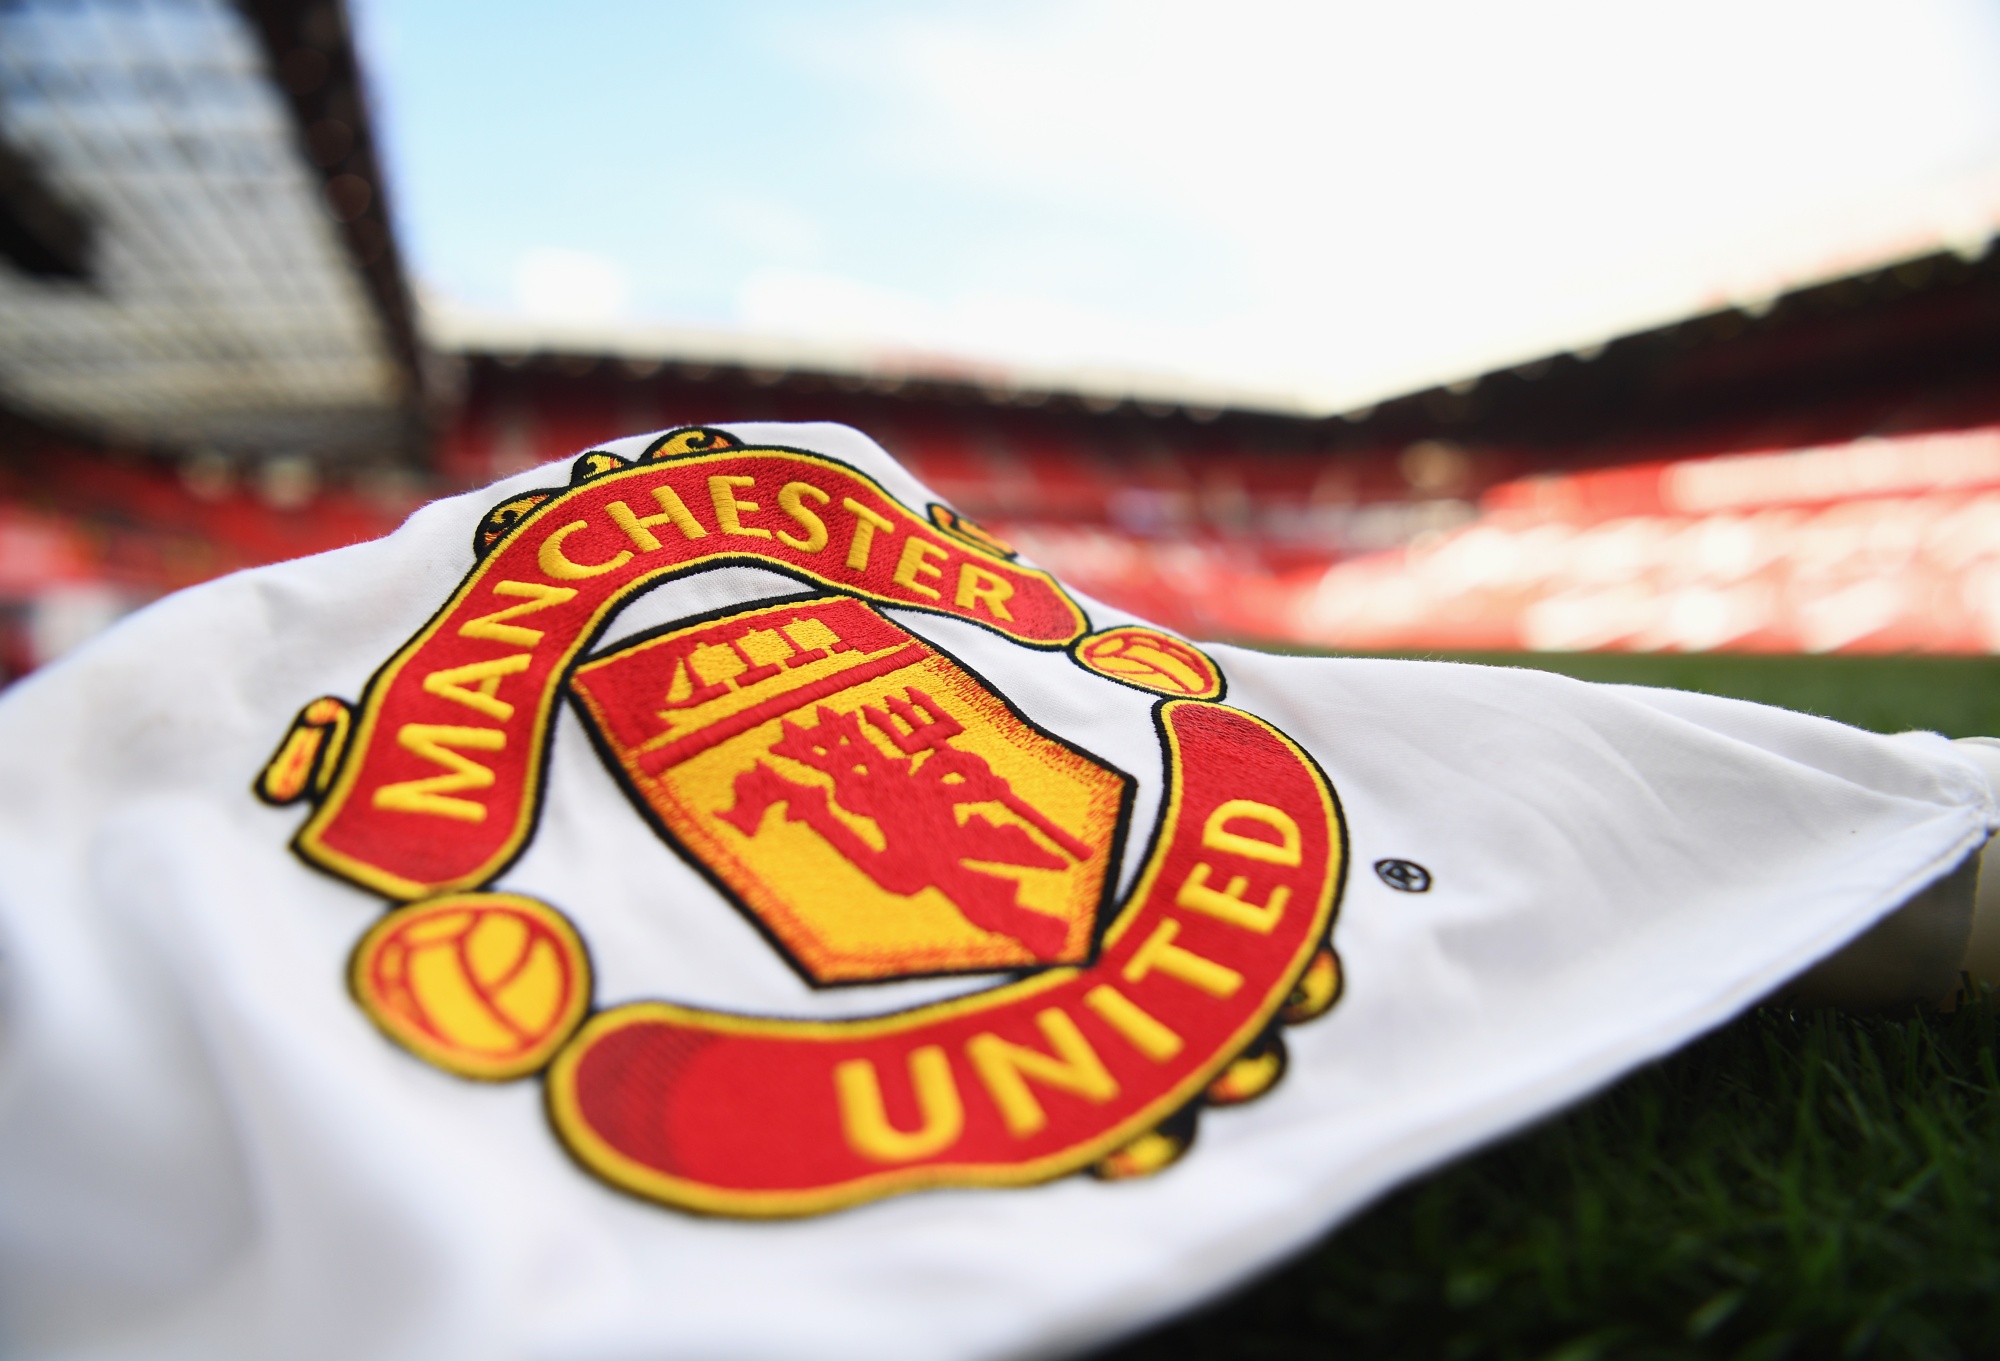 Manchester United shares hit two-month high on speculations over takeover  bid